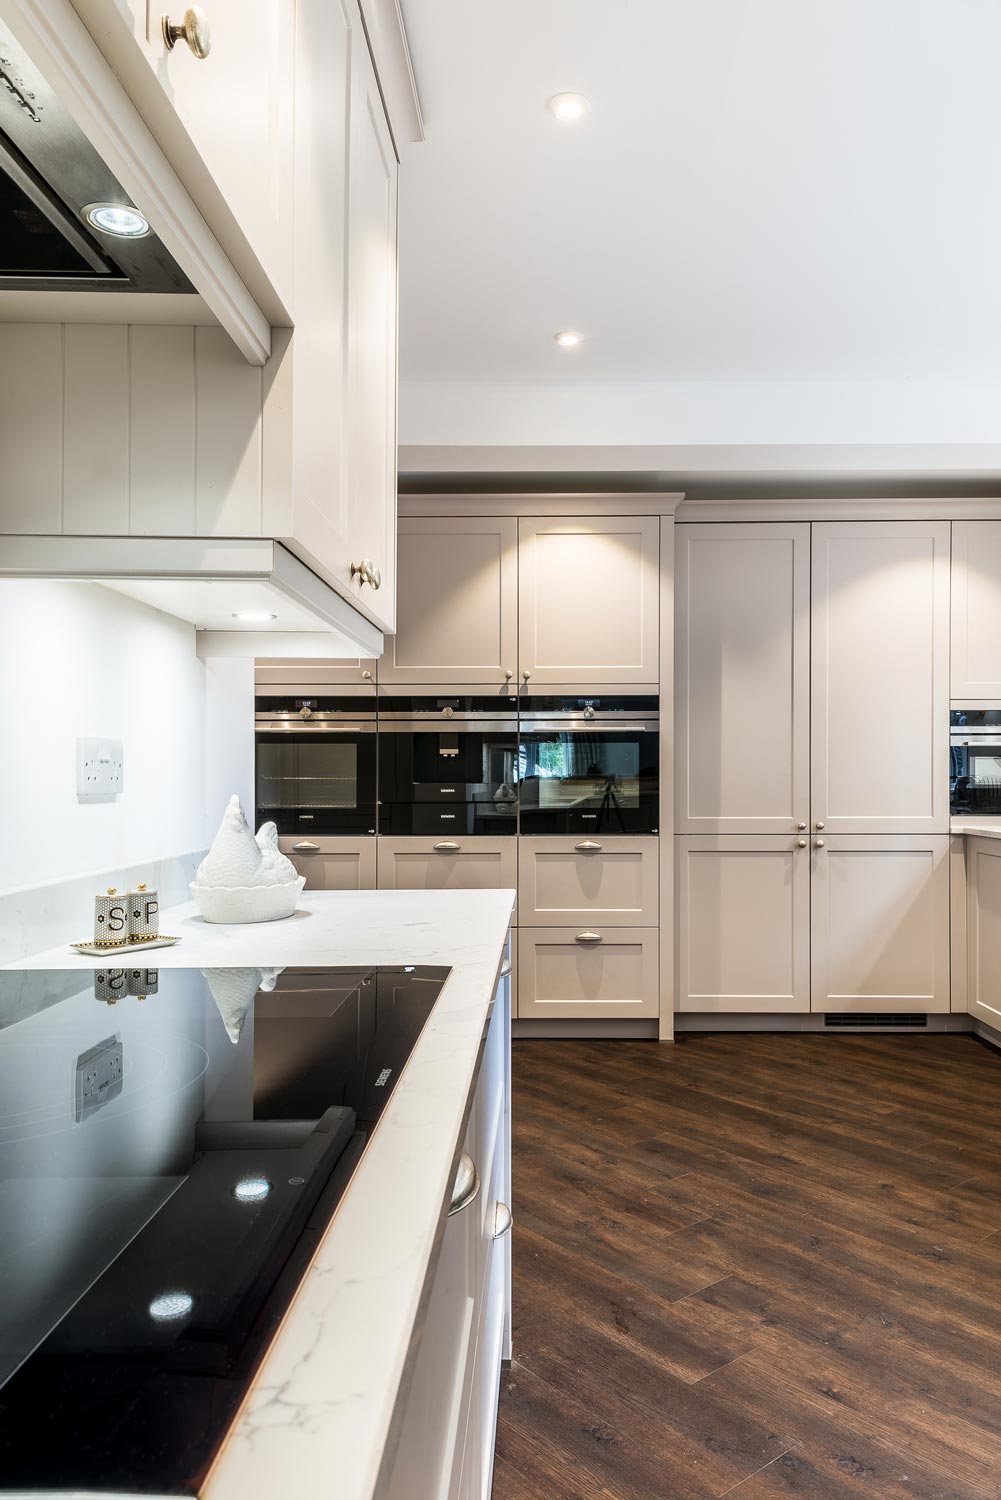 KBD - Signature Kitchen by Design, Martin and Tracy case study